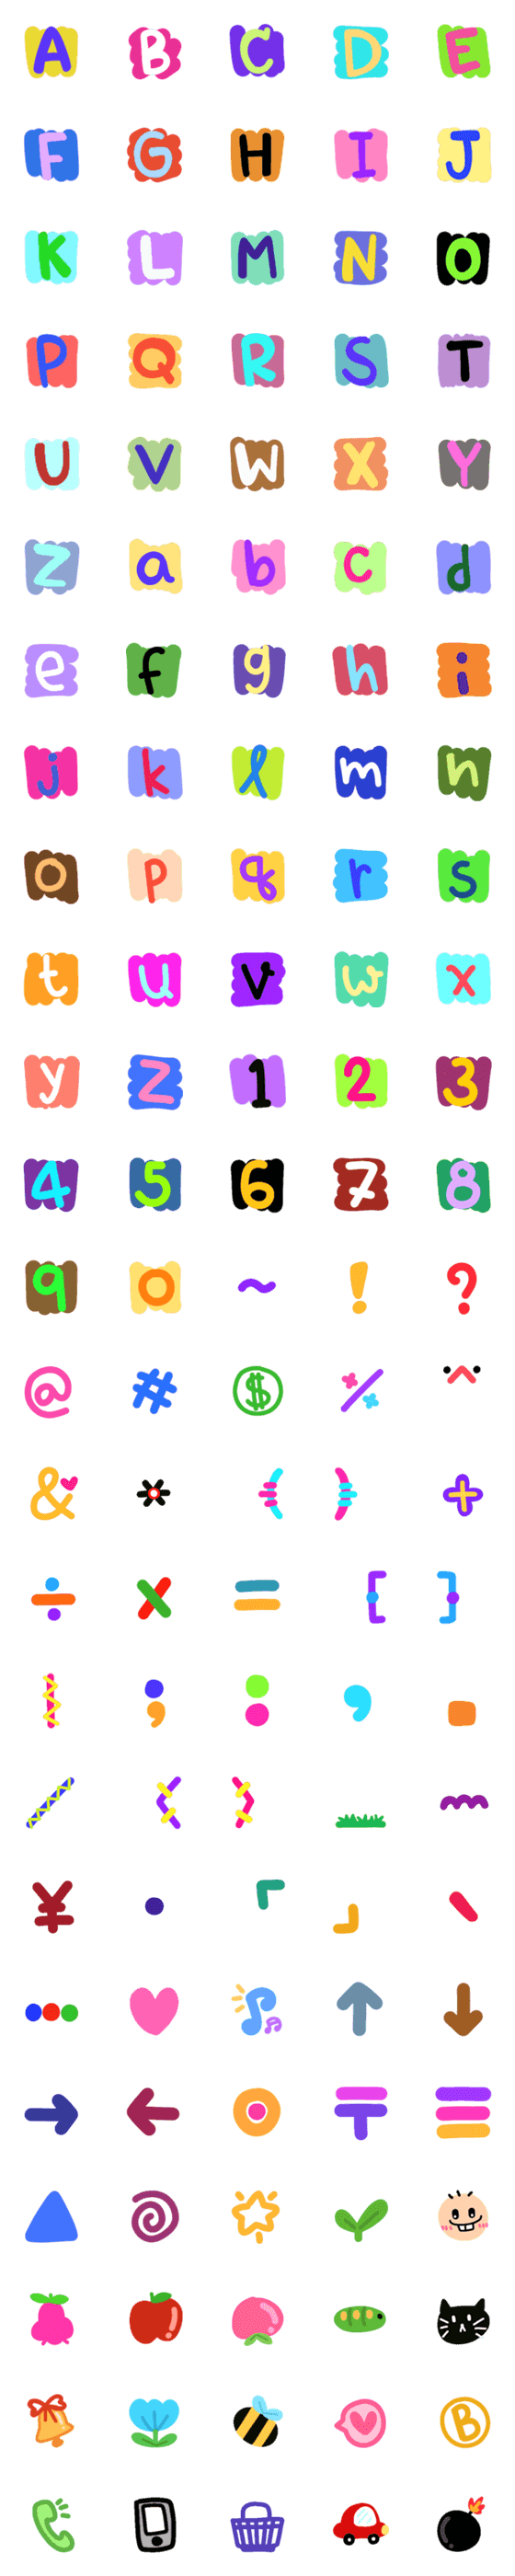 [LINE絵文字]Alphabet adorable colorful funの画像一覧